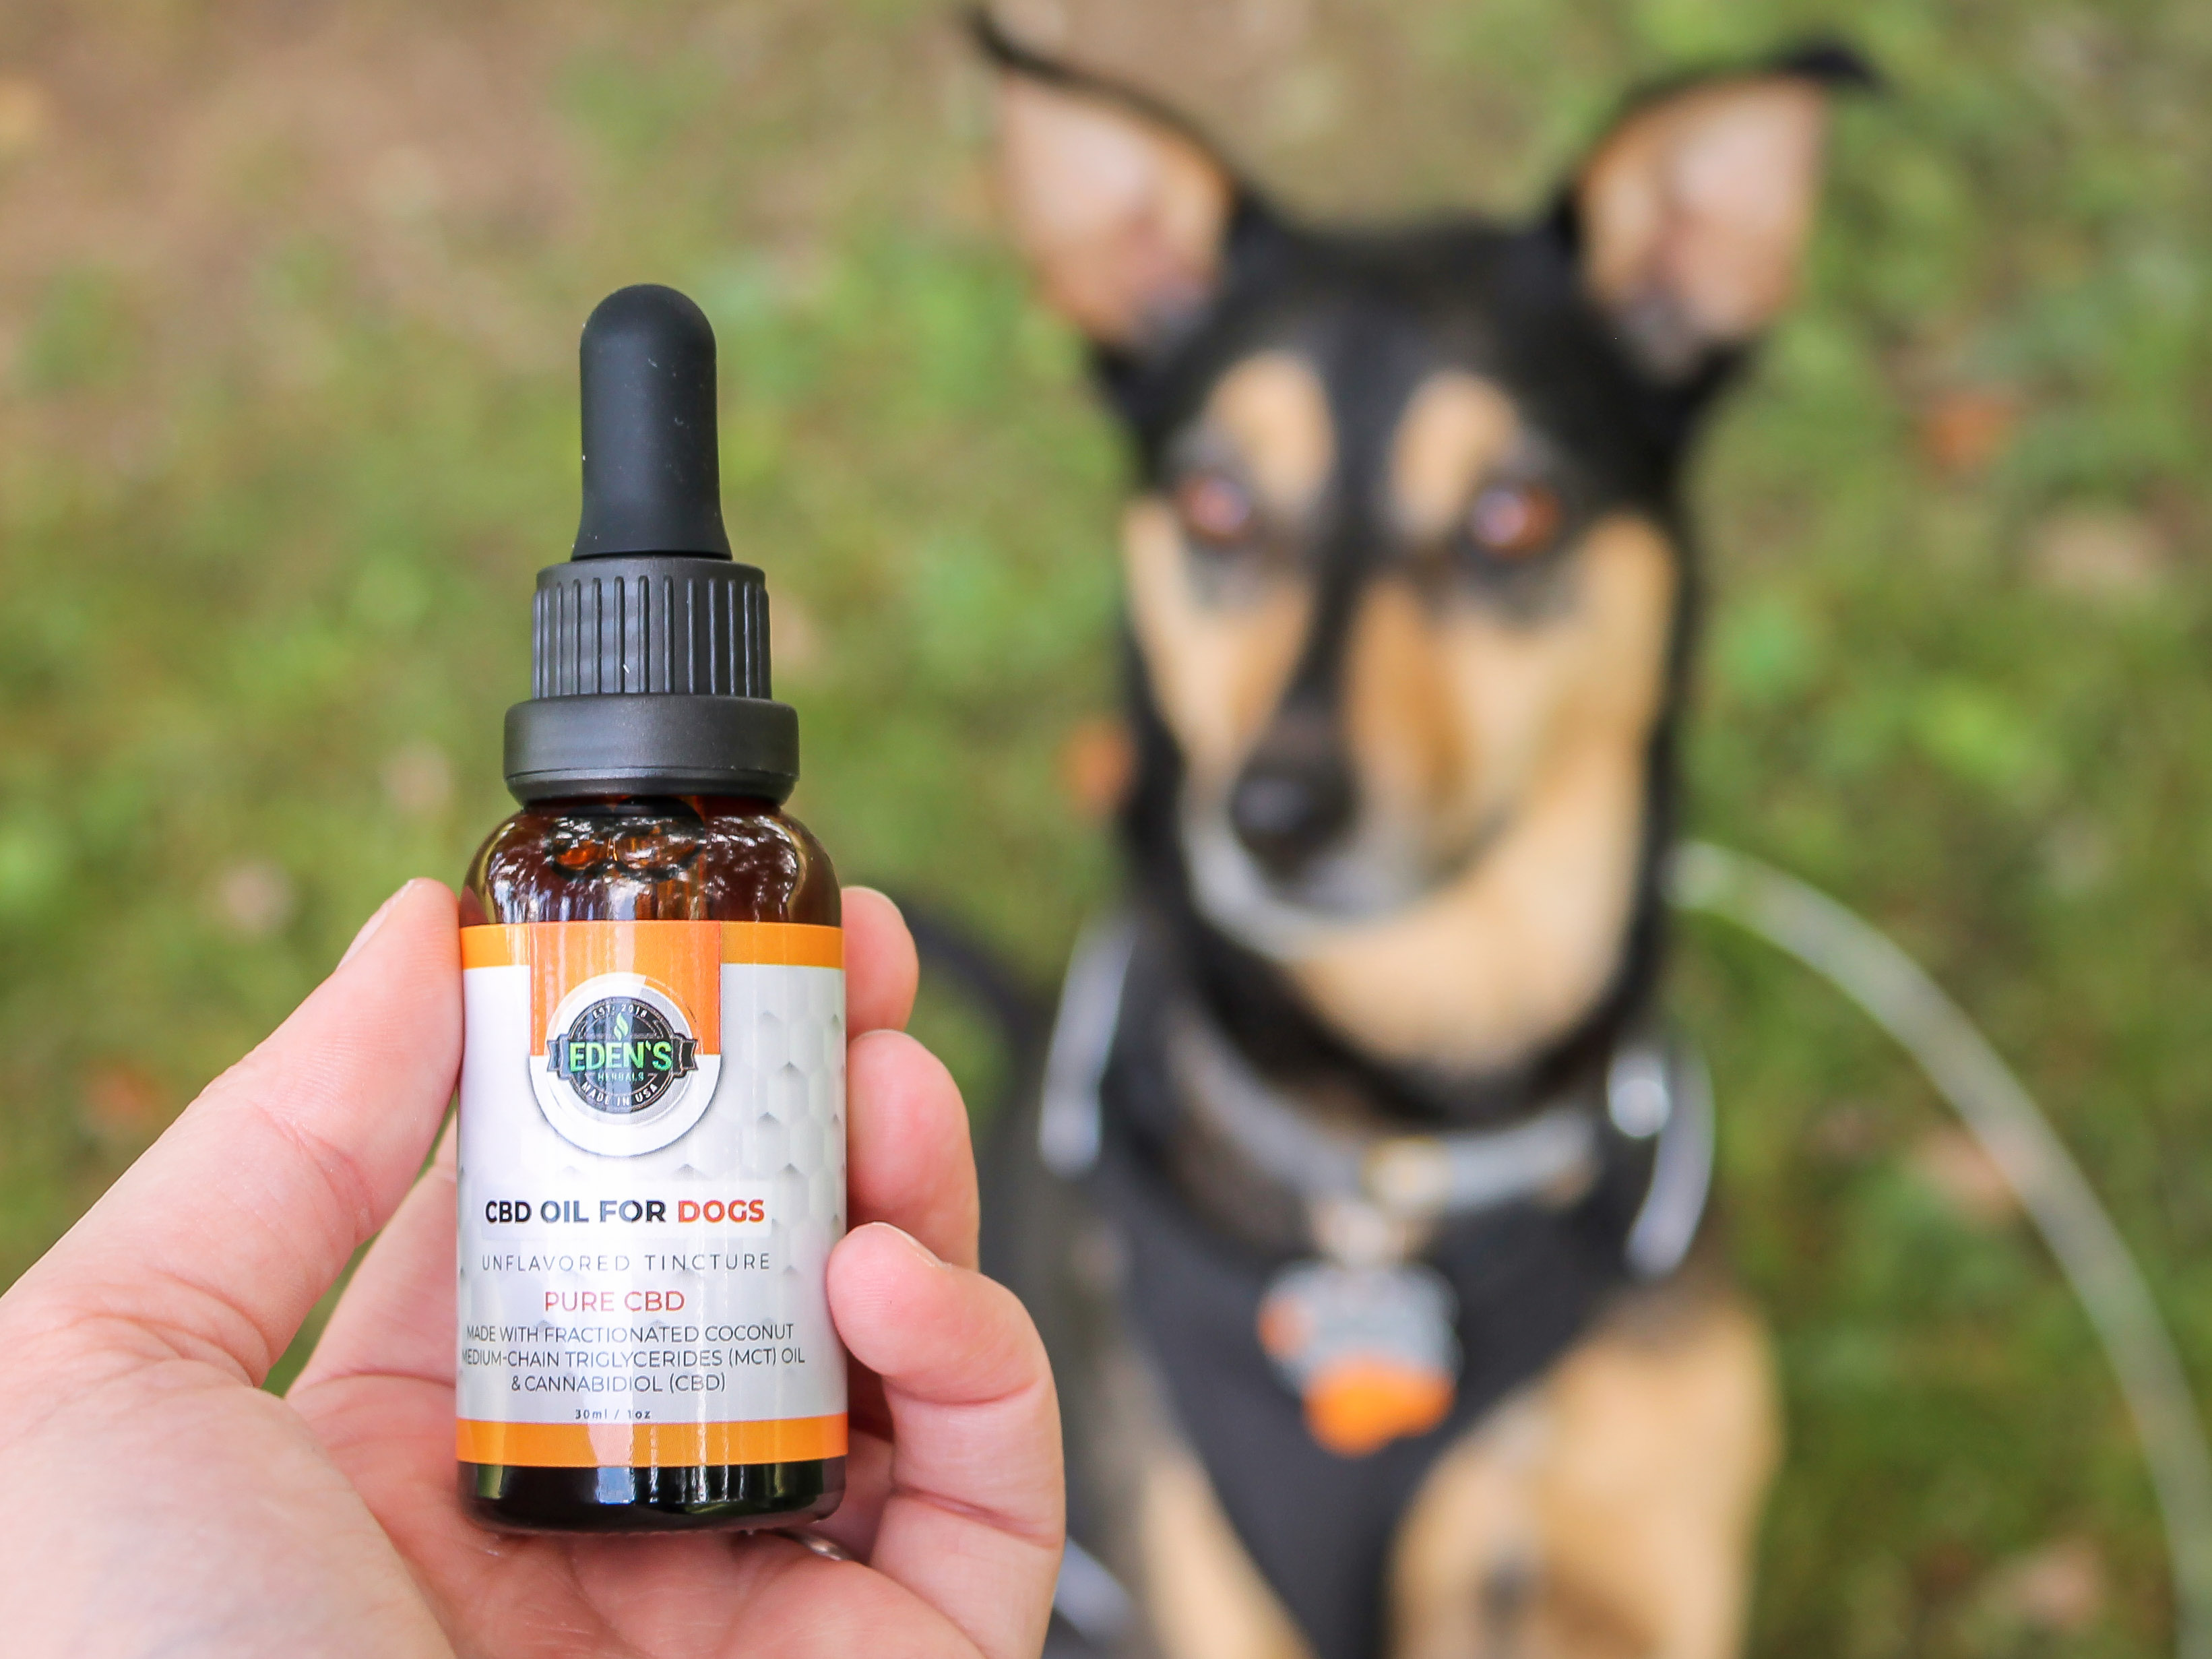 Dog owner holding up tincture of cbd oil for dogs while their dog waits patiently for their dosage